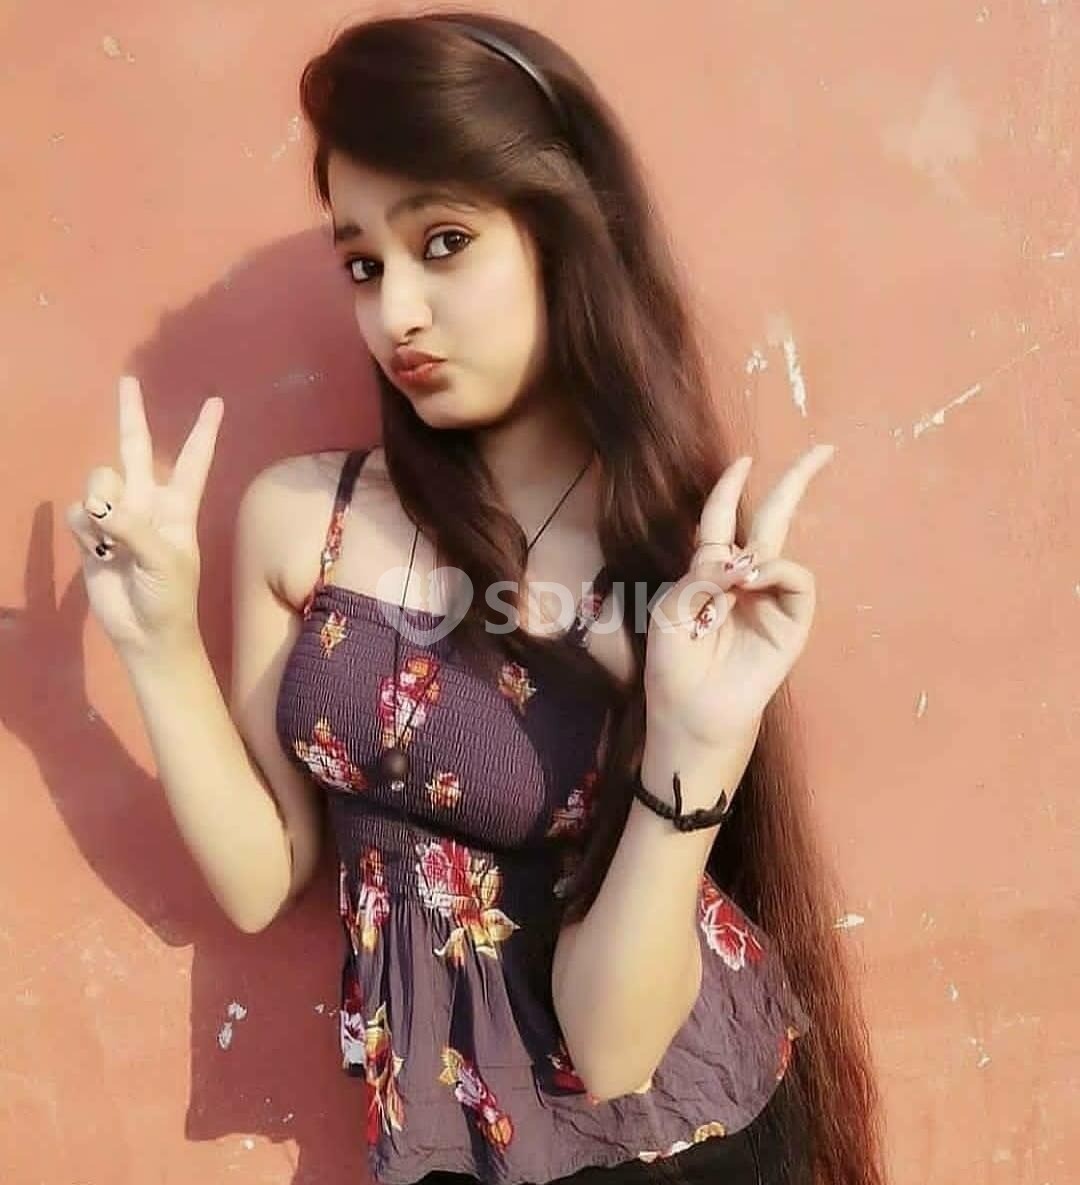 Greater Noida LOW PRICE🔸k✅d( 24×7 ) SERVICE A AVAILABLE 100% SAFE AND S SECURE UNLIMITED ENJOY HOT COLLEGE GIRL HO